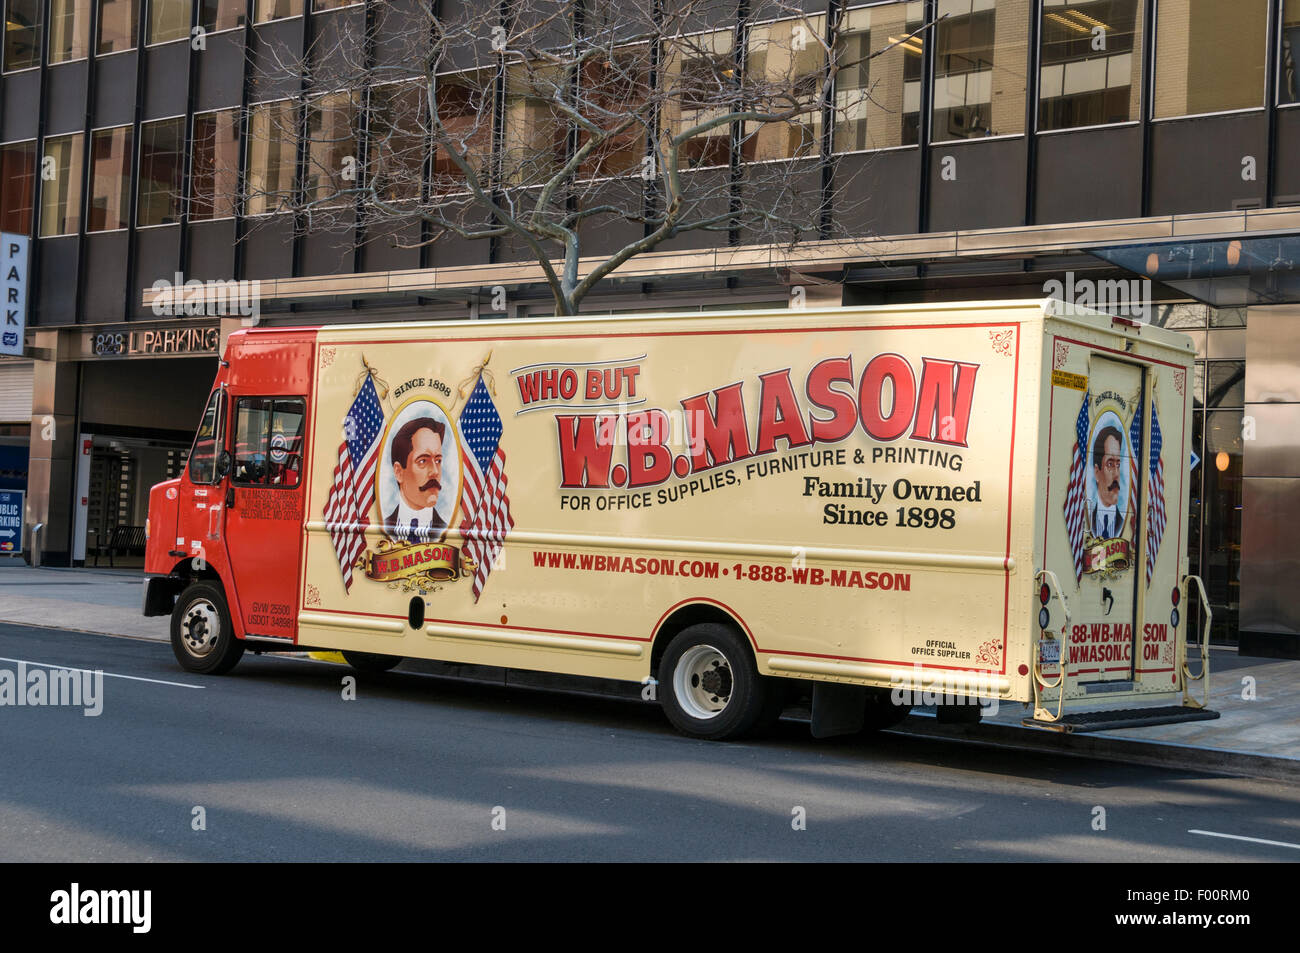 Colorful delivery truck of W.B. Mason an office products dealer in the U.S. Stock Photo